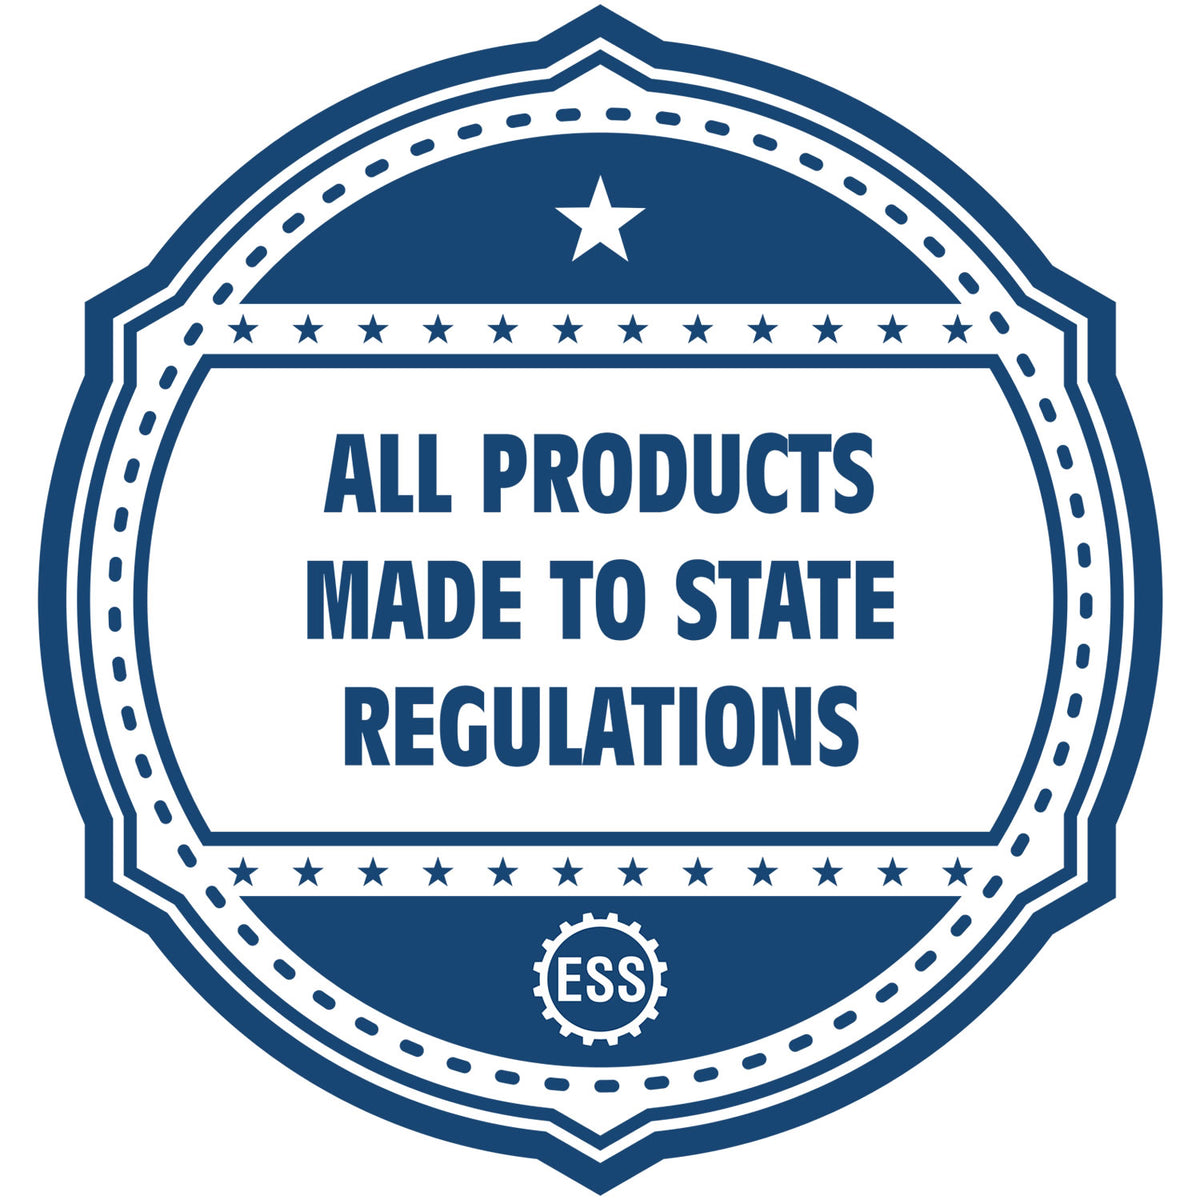 An icon or badge element for the Self-Inking Rectangular Illinois Notary Stamp showing that this product is made in compliance with state regulations.